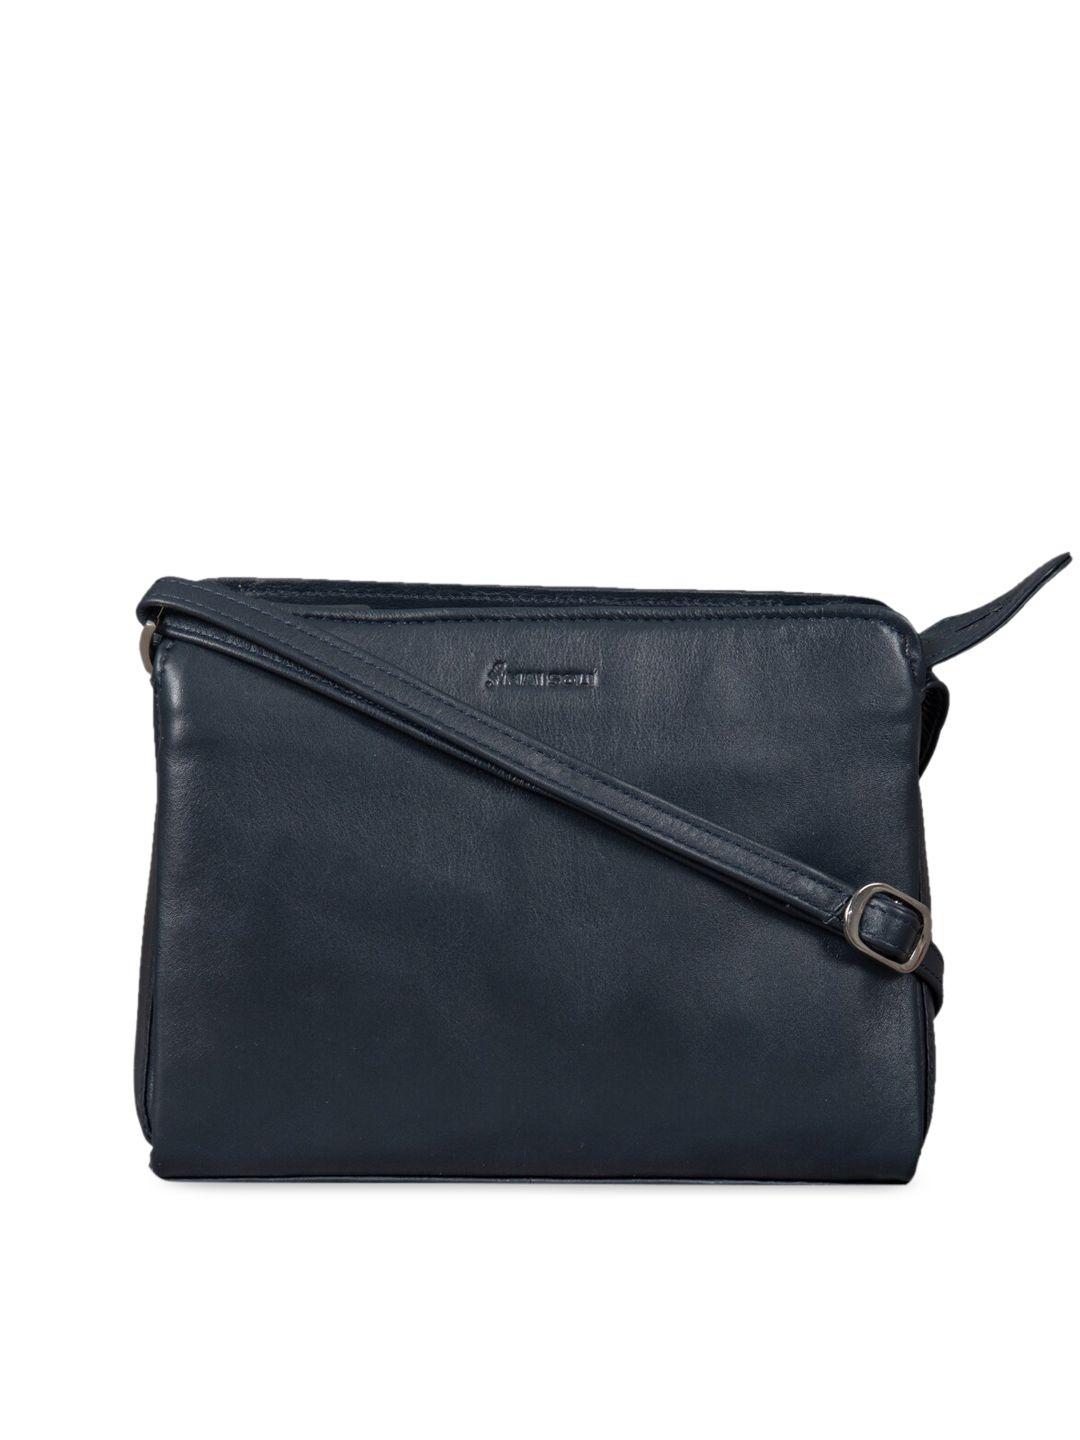 mai soli women navy blue solid leather sling bag